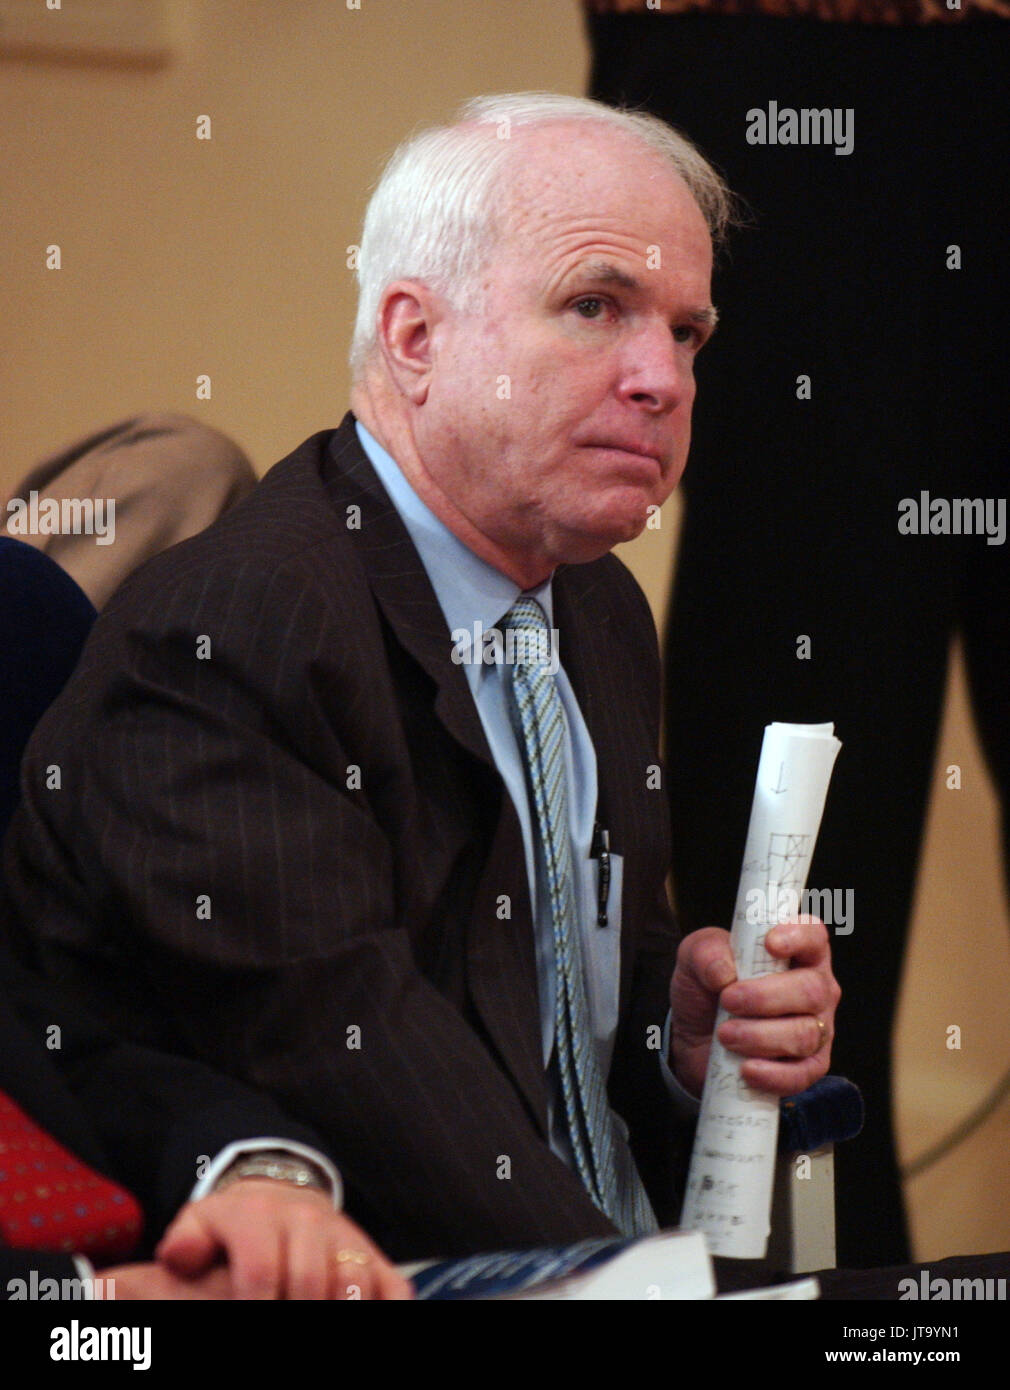 United States Senator John McCain (Republican of Arizona), a member of the Commission on the Intelligence Capabilities of the United States Regarding Weapons of Mass Destruction at the press briefing at the White House in Washington, D.C. on March 31, 2005. Their report is highly critical of the intelligence gathering community in the United States. Credit: Ron Sachs - CNP /MediaPunch Stock Photo